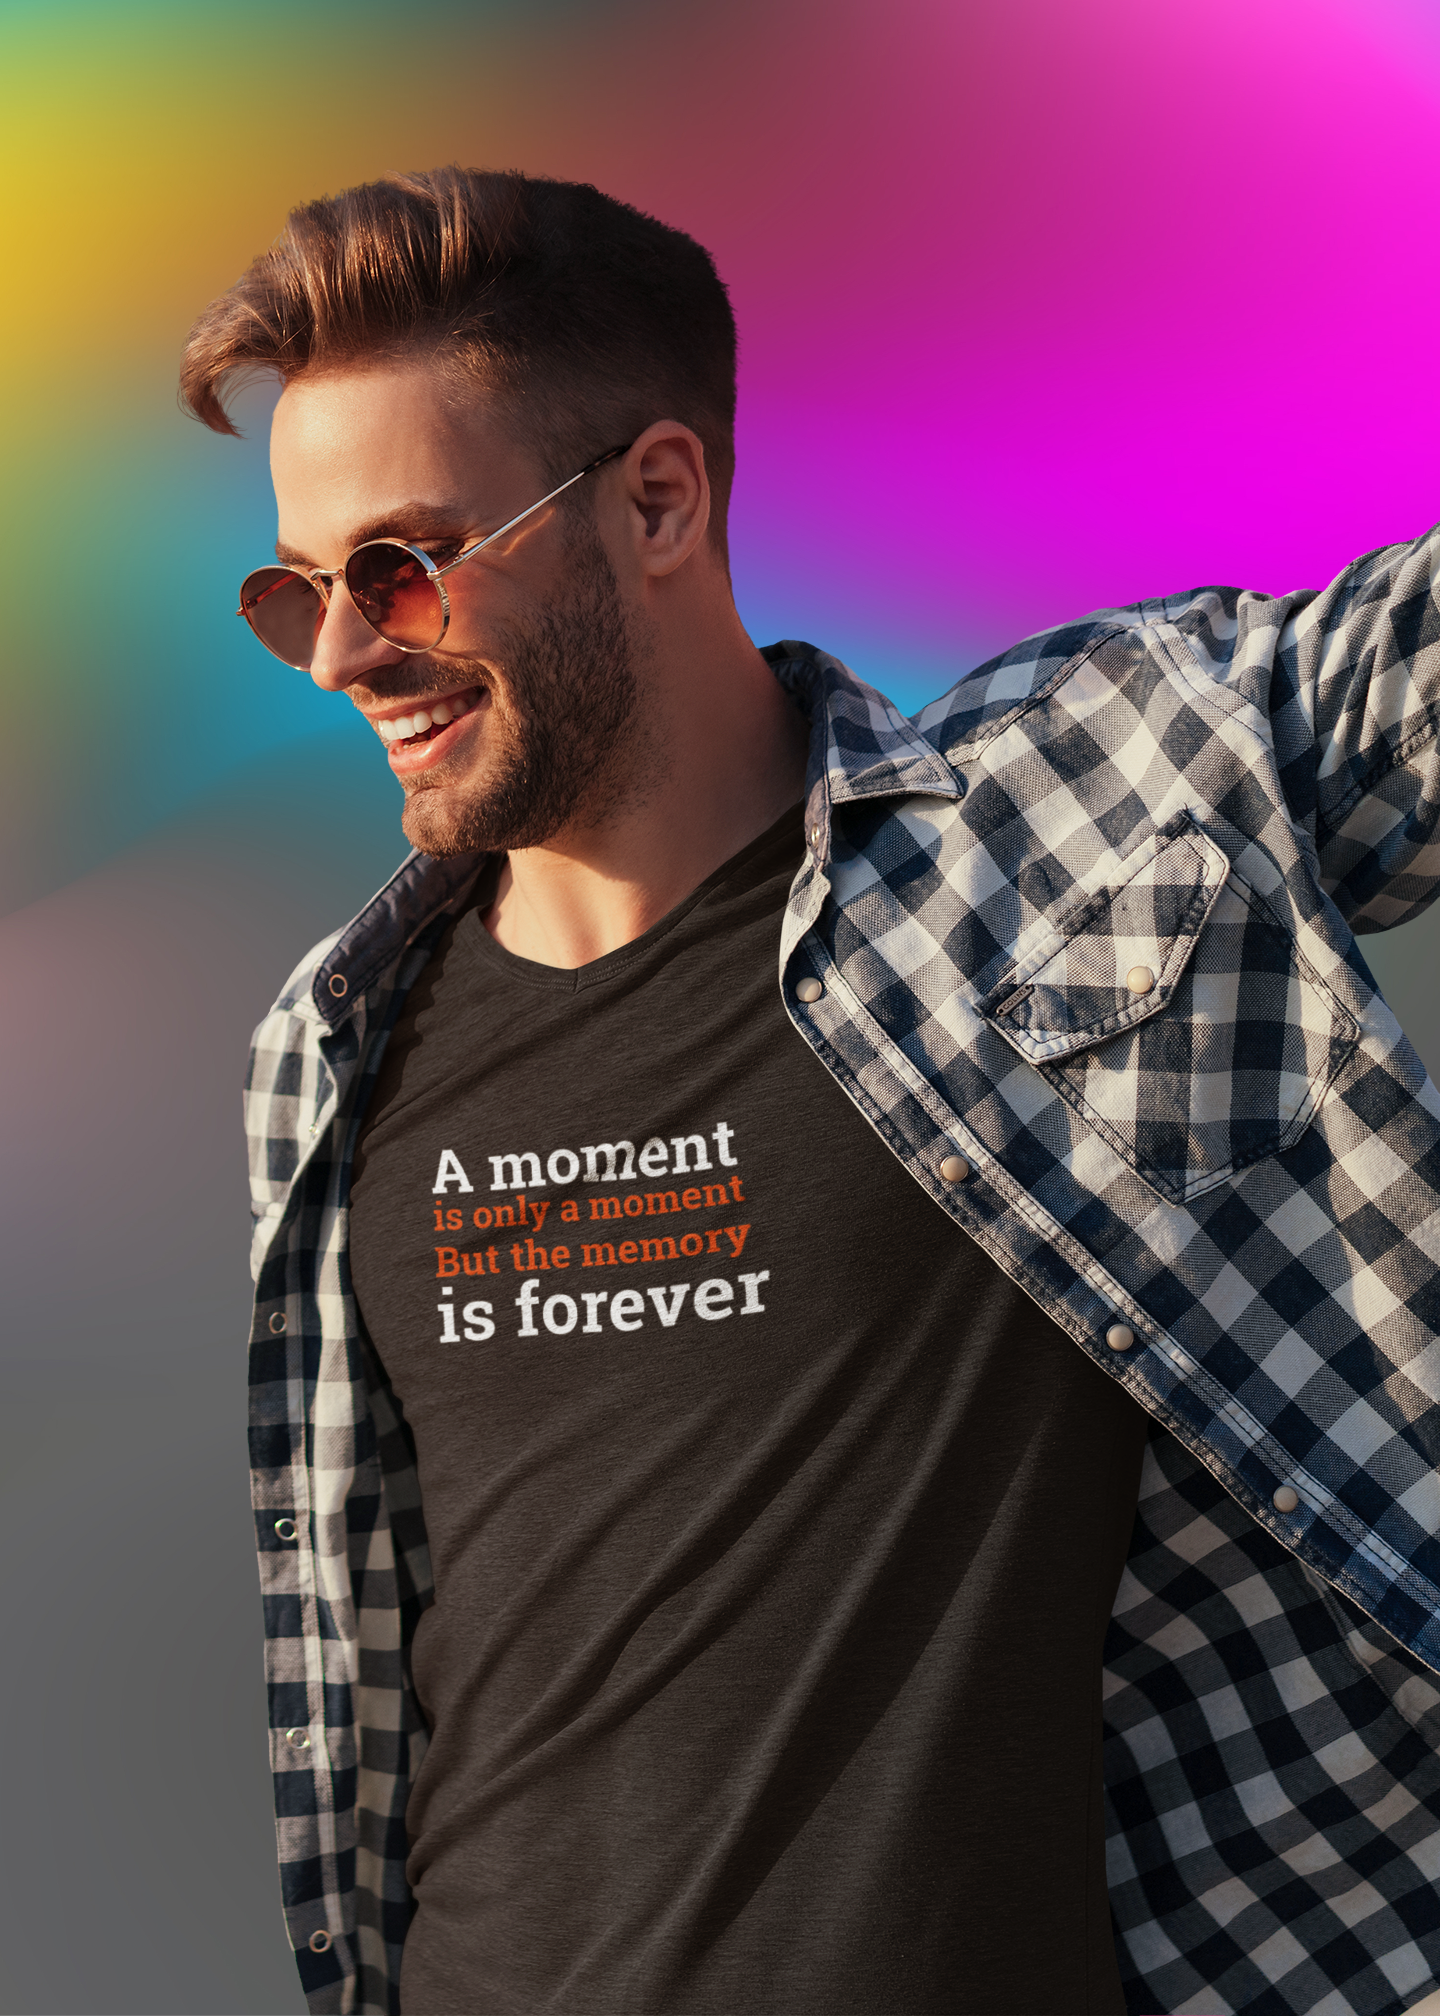 A moment is only a moment. But the memory is forever. Black t-shirt modern fit.